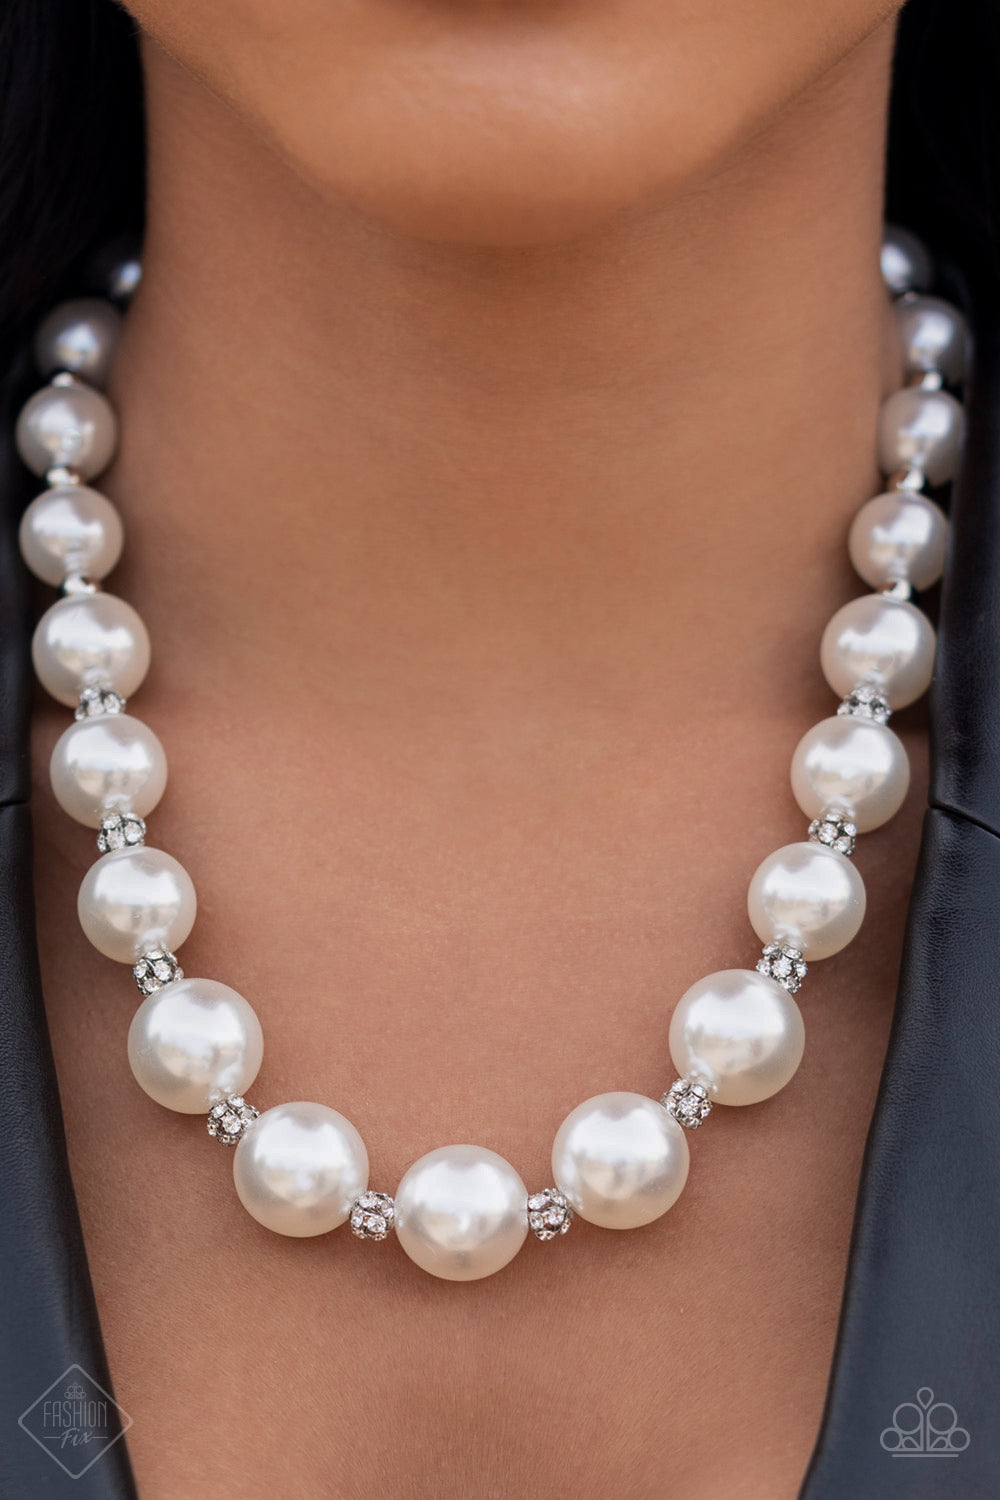 Paparazzi gray and silver pearls different sizes, silver tone necklace |  eBay